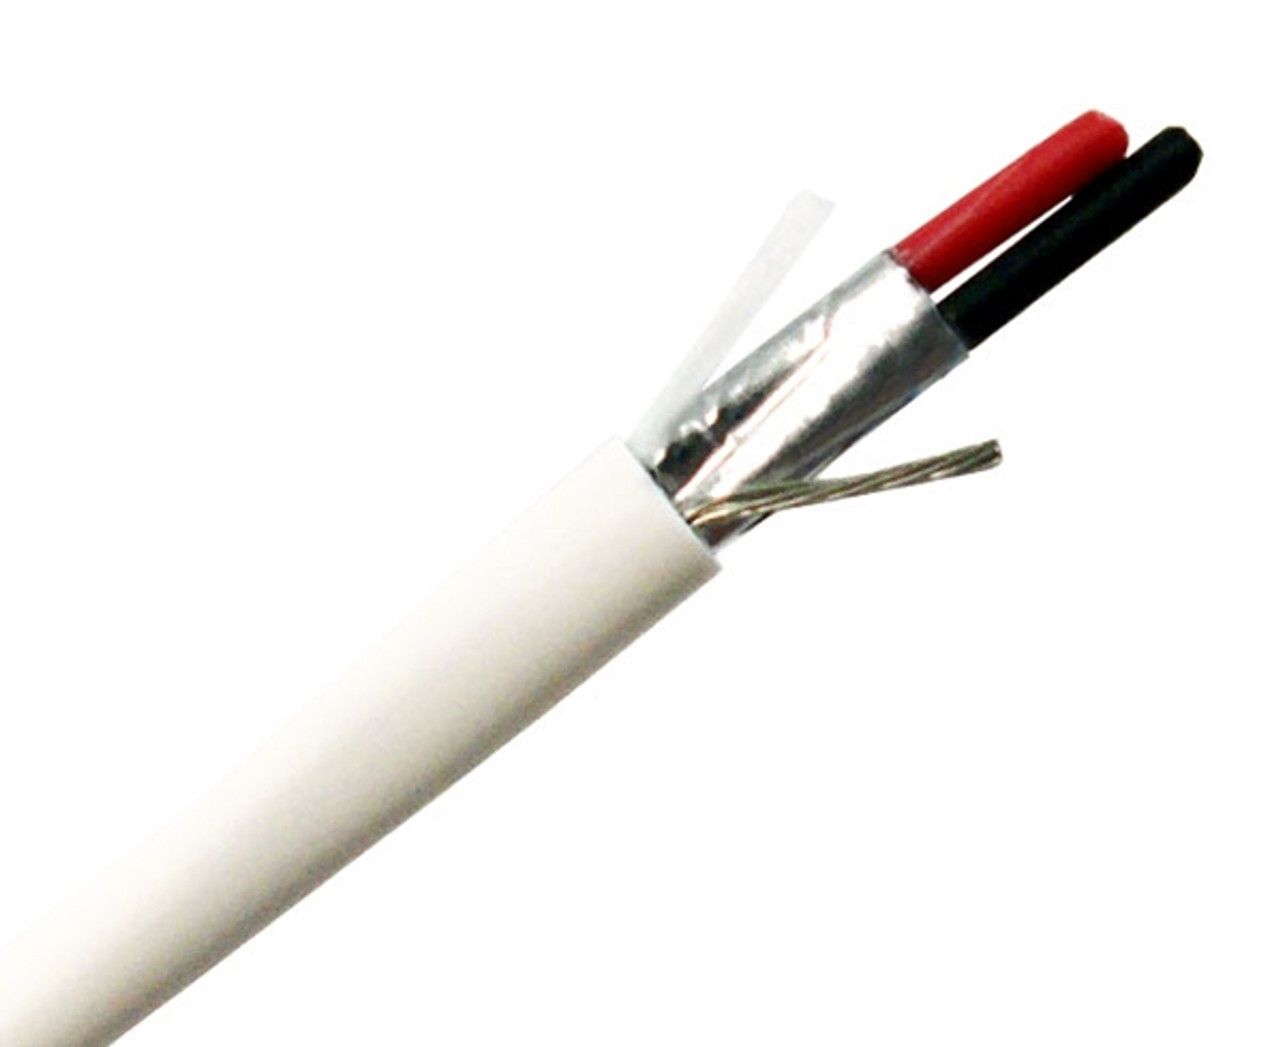 How to Insulate Your Wires - Nutech